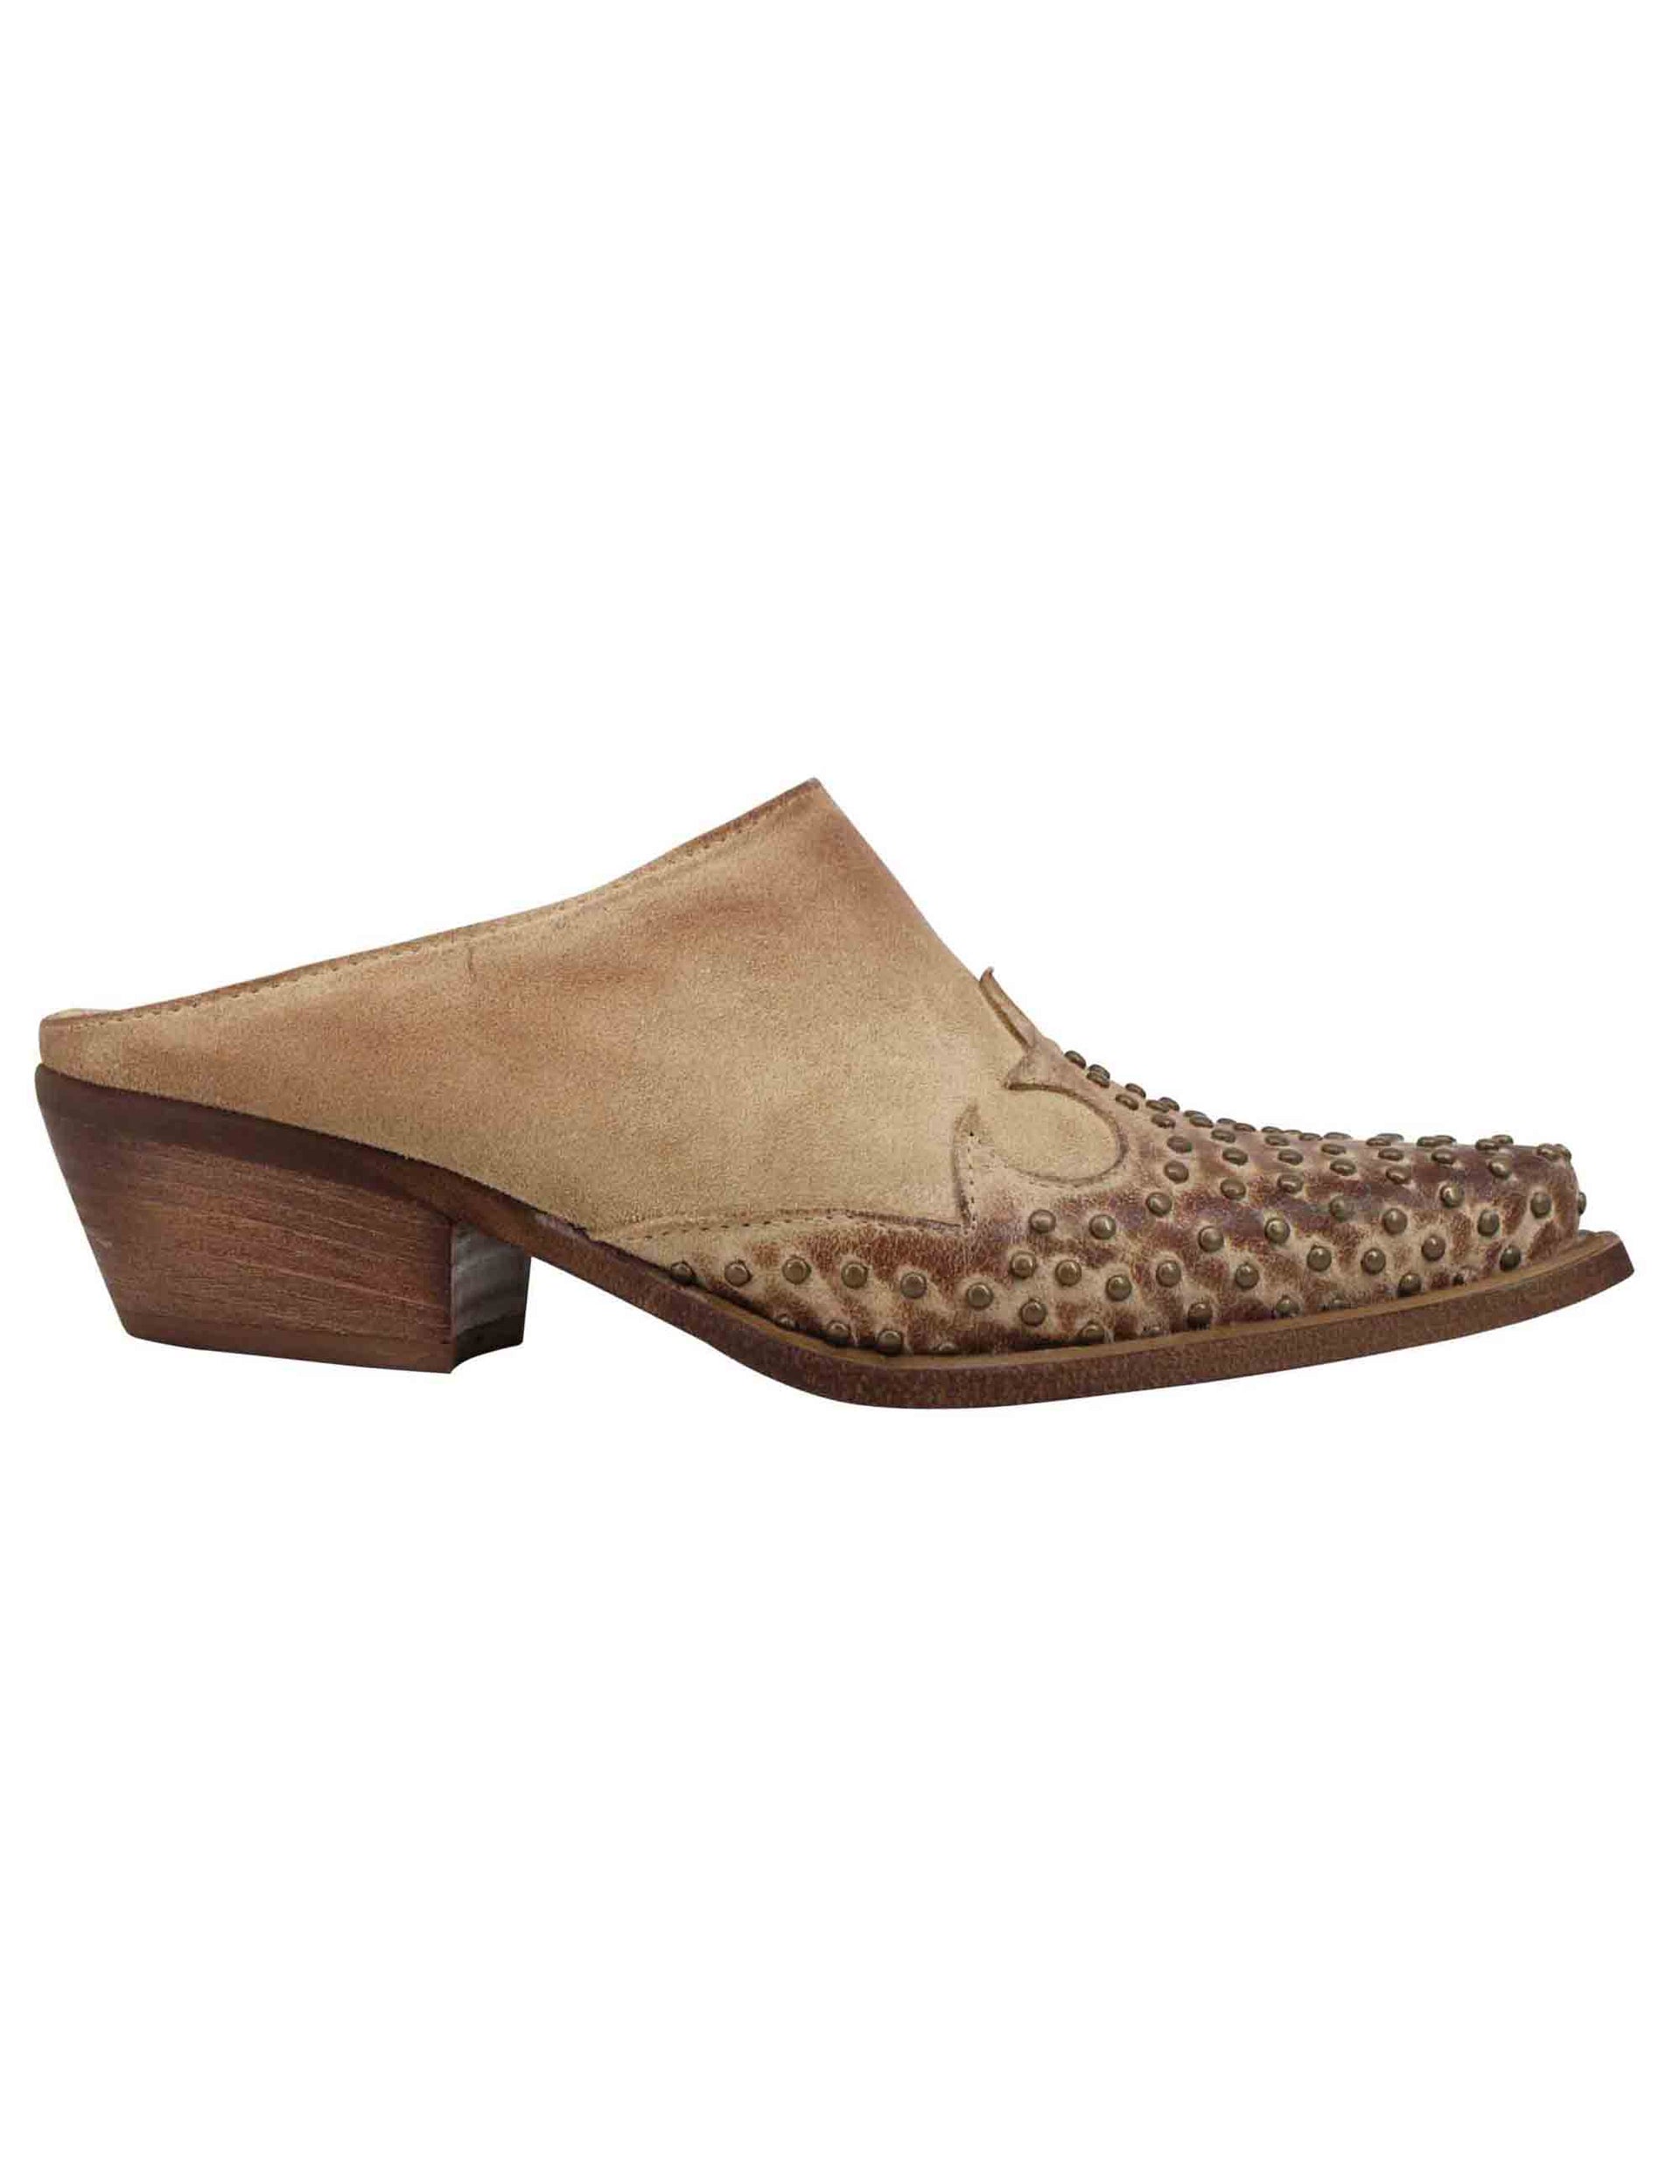 Women's beige leather sabot with studs